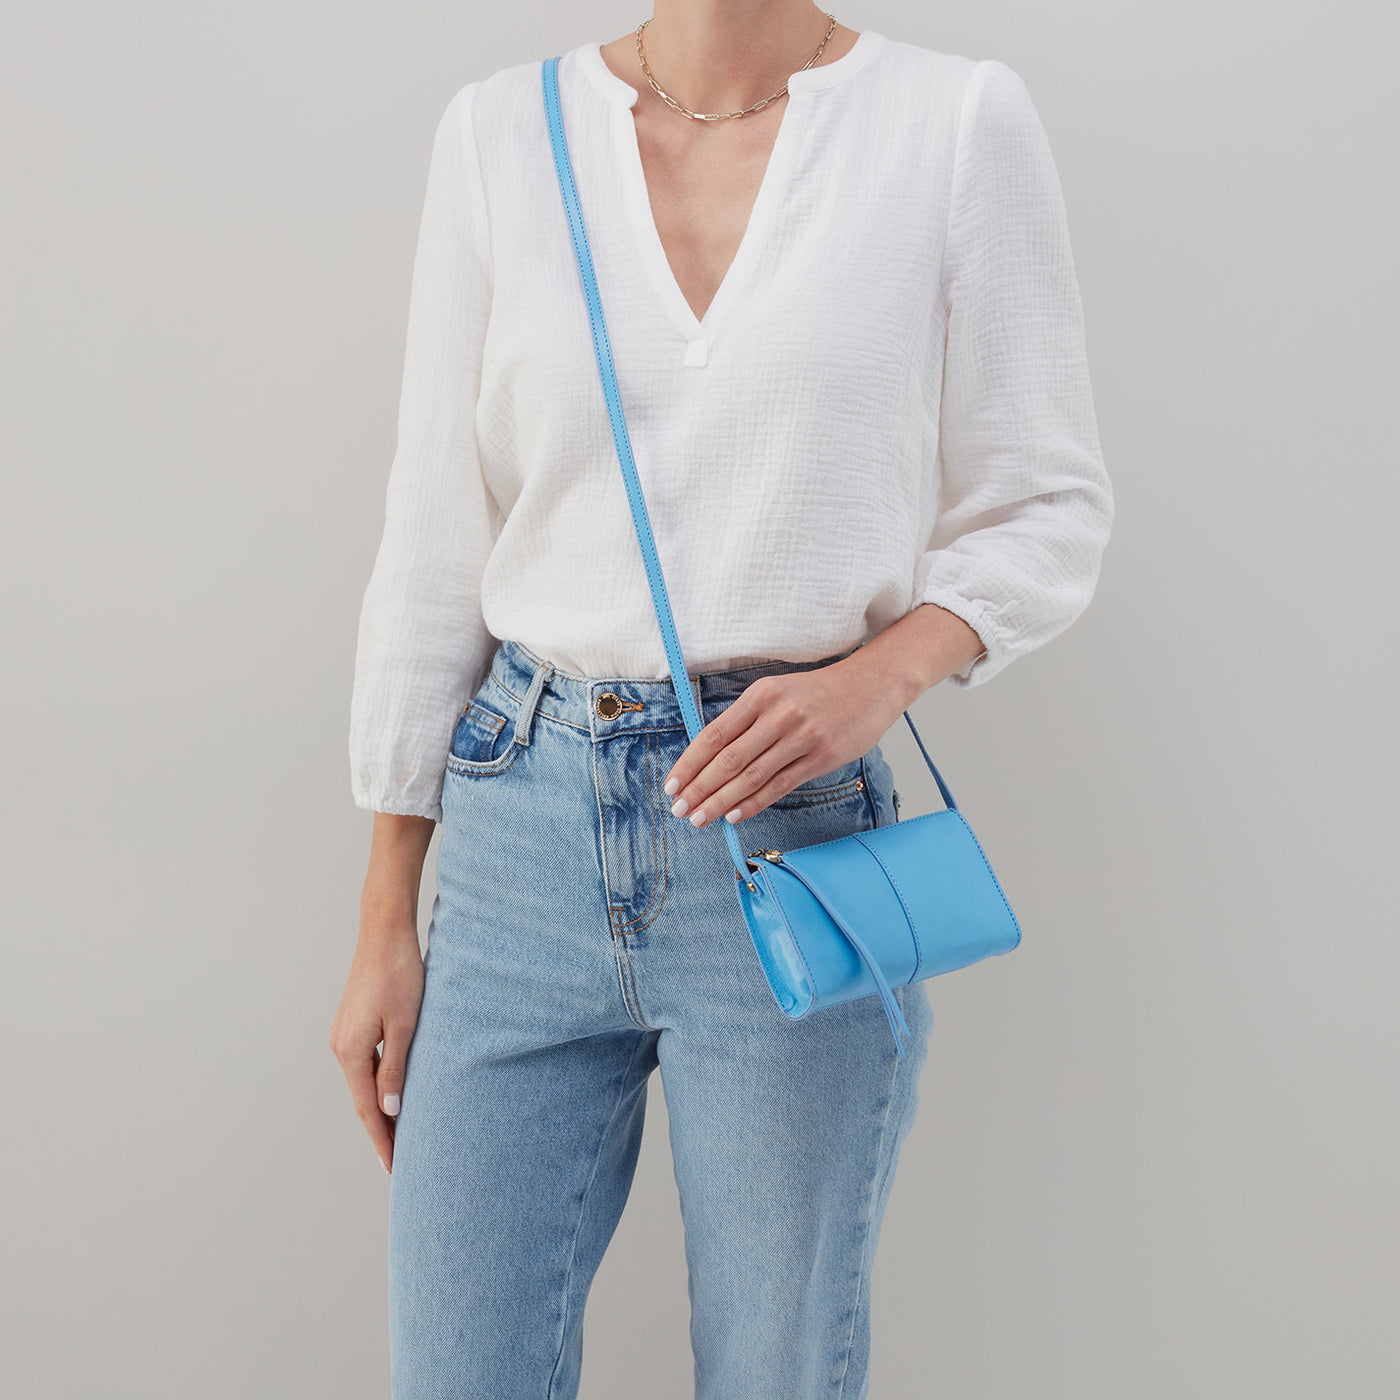 Jewel Crossbody in Polished Leather - Tranquil Blue